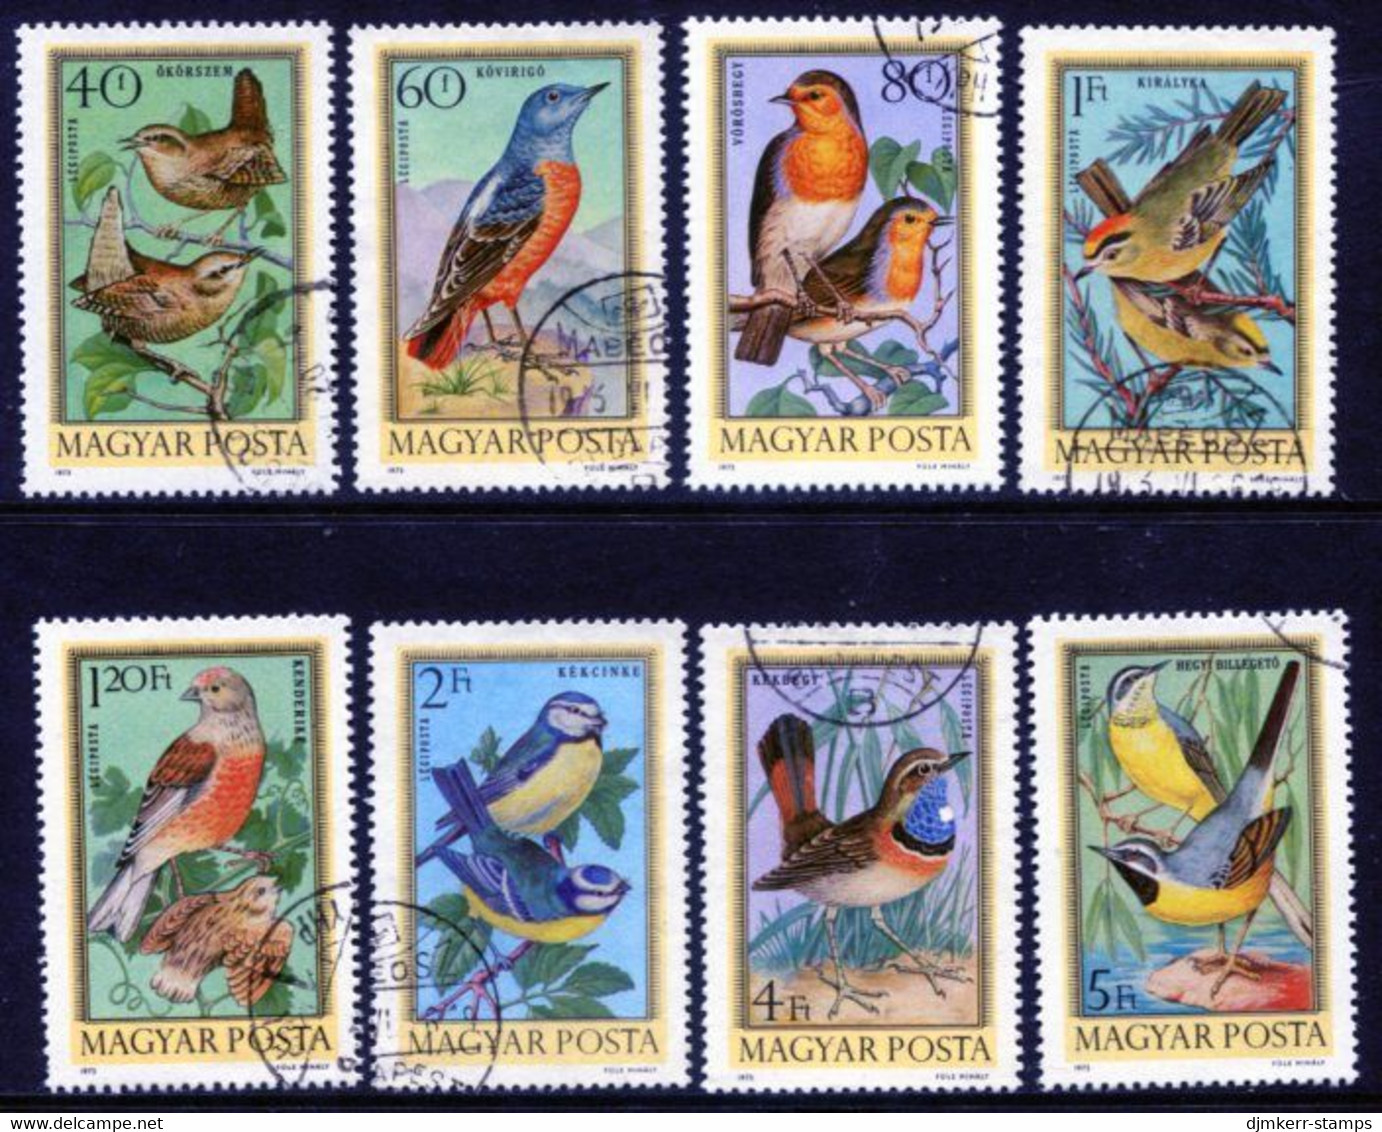 HUNGARY 1973 Songbirds Used.  Michel 2855-62 - Used Stamps